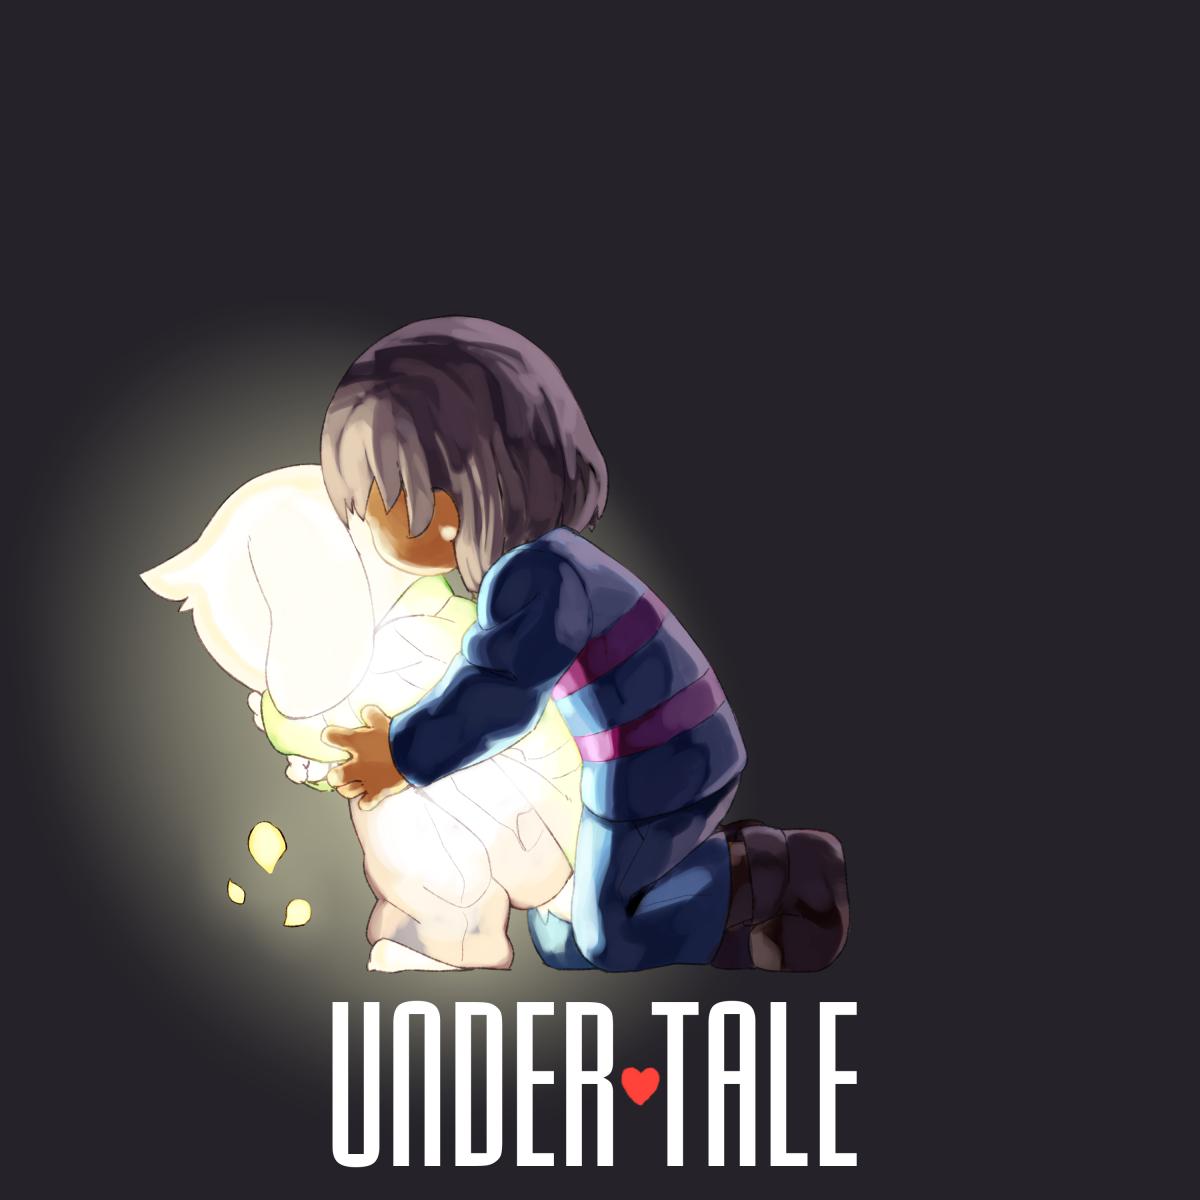 UNDER TALE